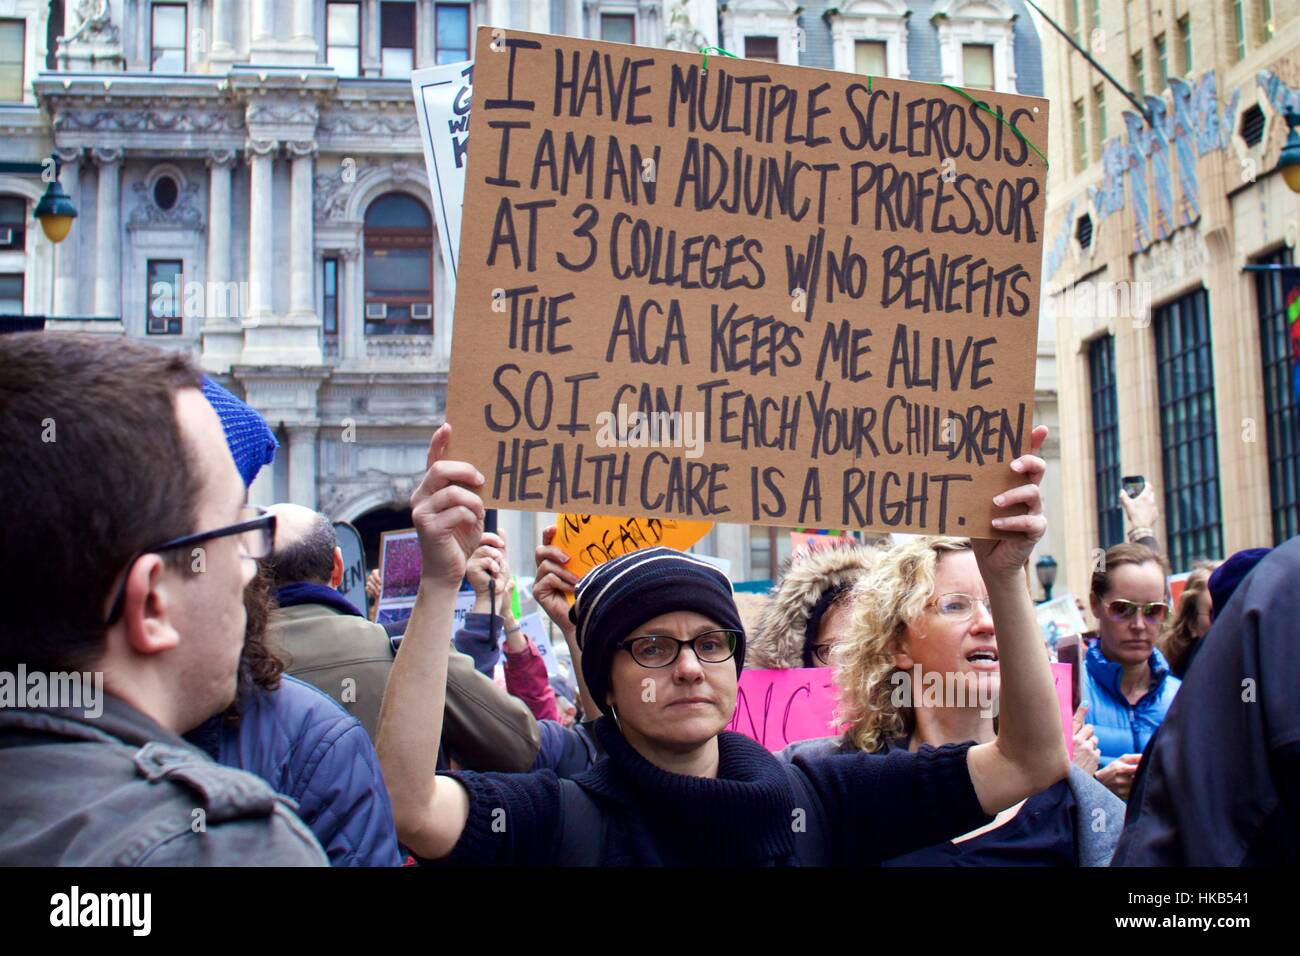 Philadelphia, USA. 26th Jan, 2017.   A woman with multiple sclerosis protests against the repeal of the Affordable Care Act protections for those with pre-existing conditions. Credit: Jana Shea/Alamy Live News Stock Photo